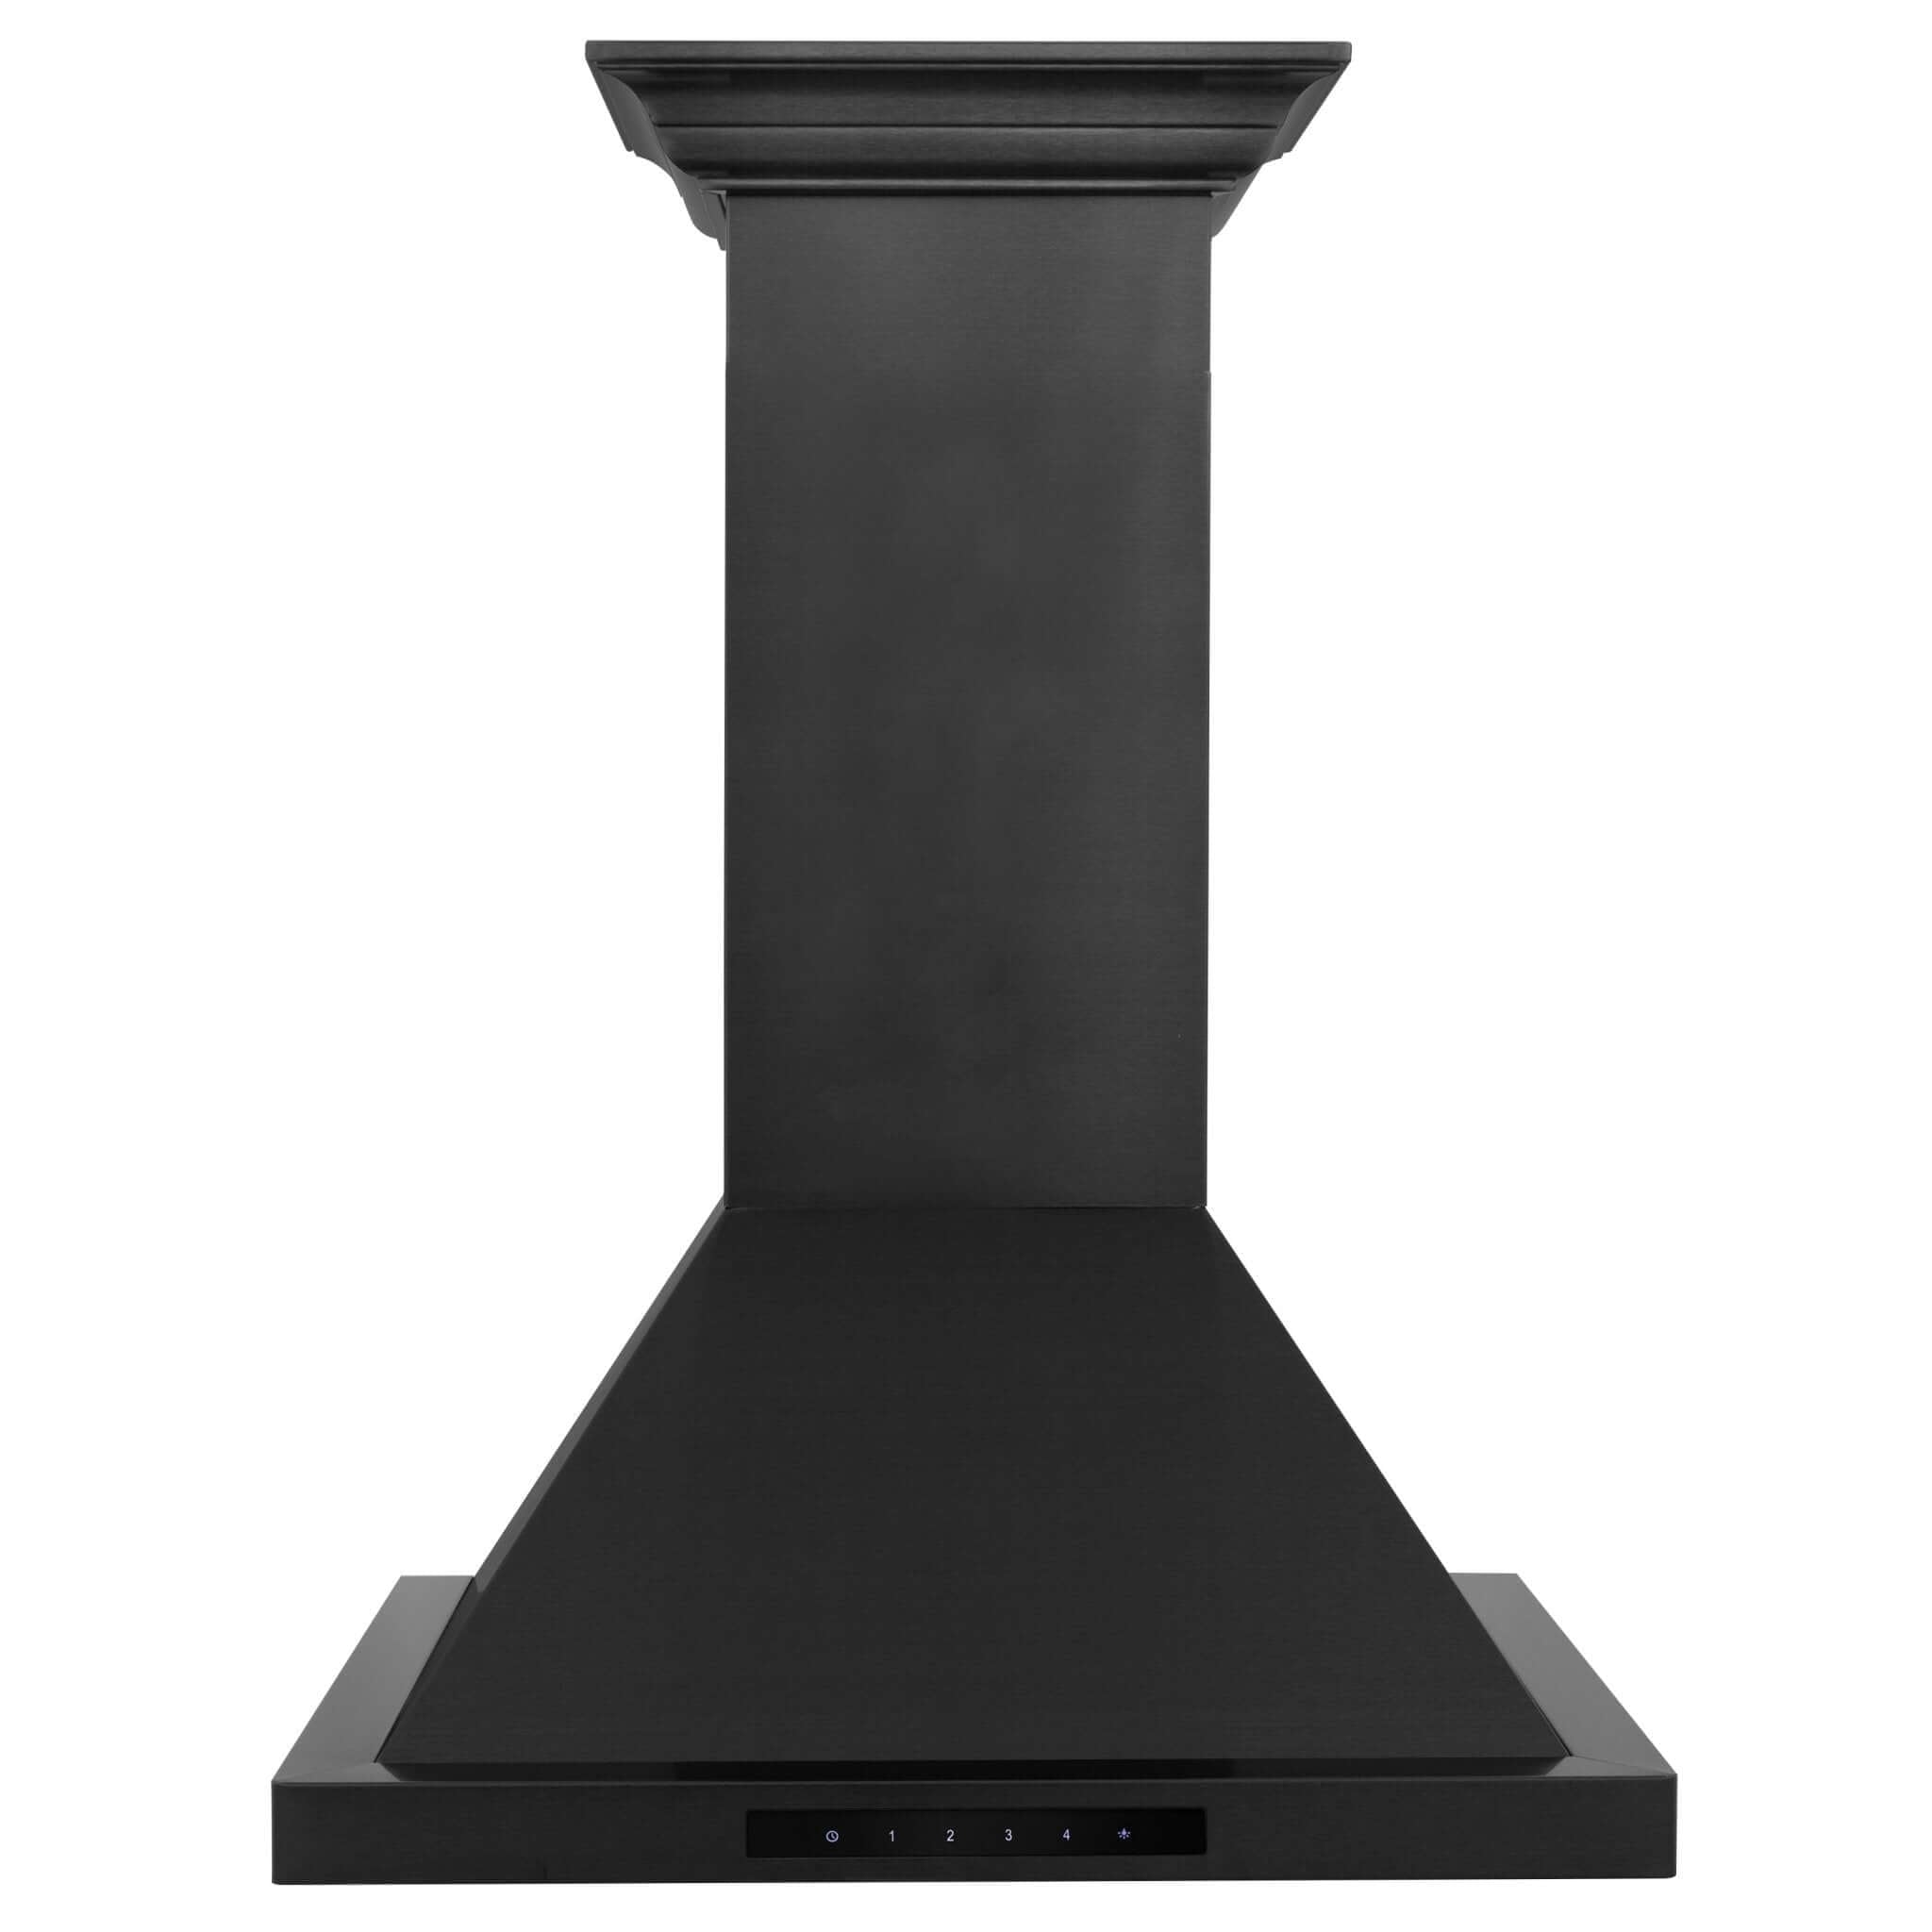 ZLINE 36" Convertible Vent Wall Mount Range Hood in Black Stainless Steel with Crown Molding (BSKBNCRN-36)